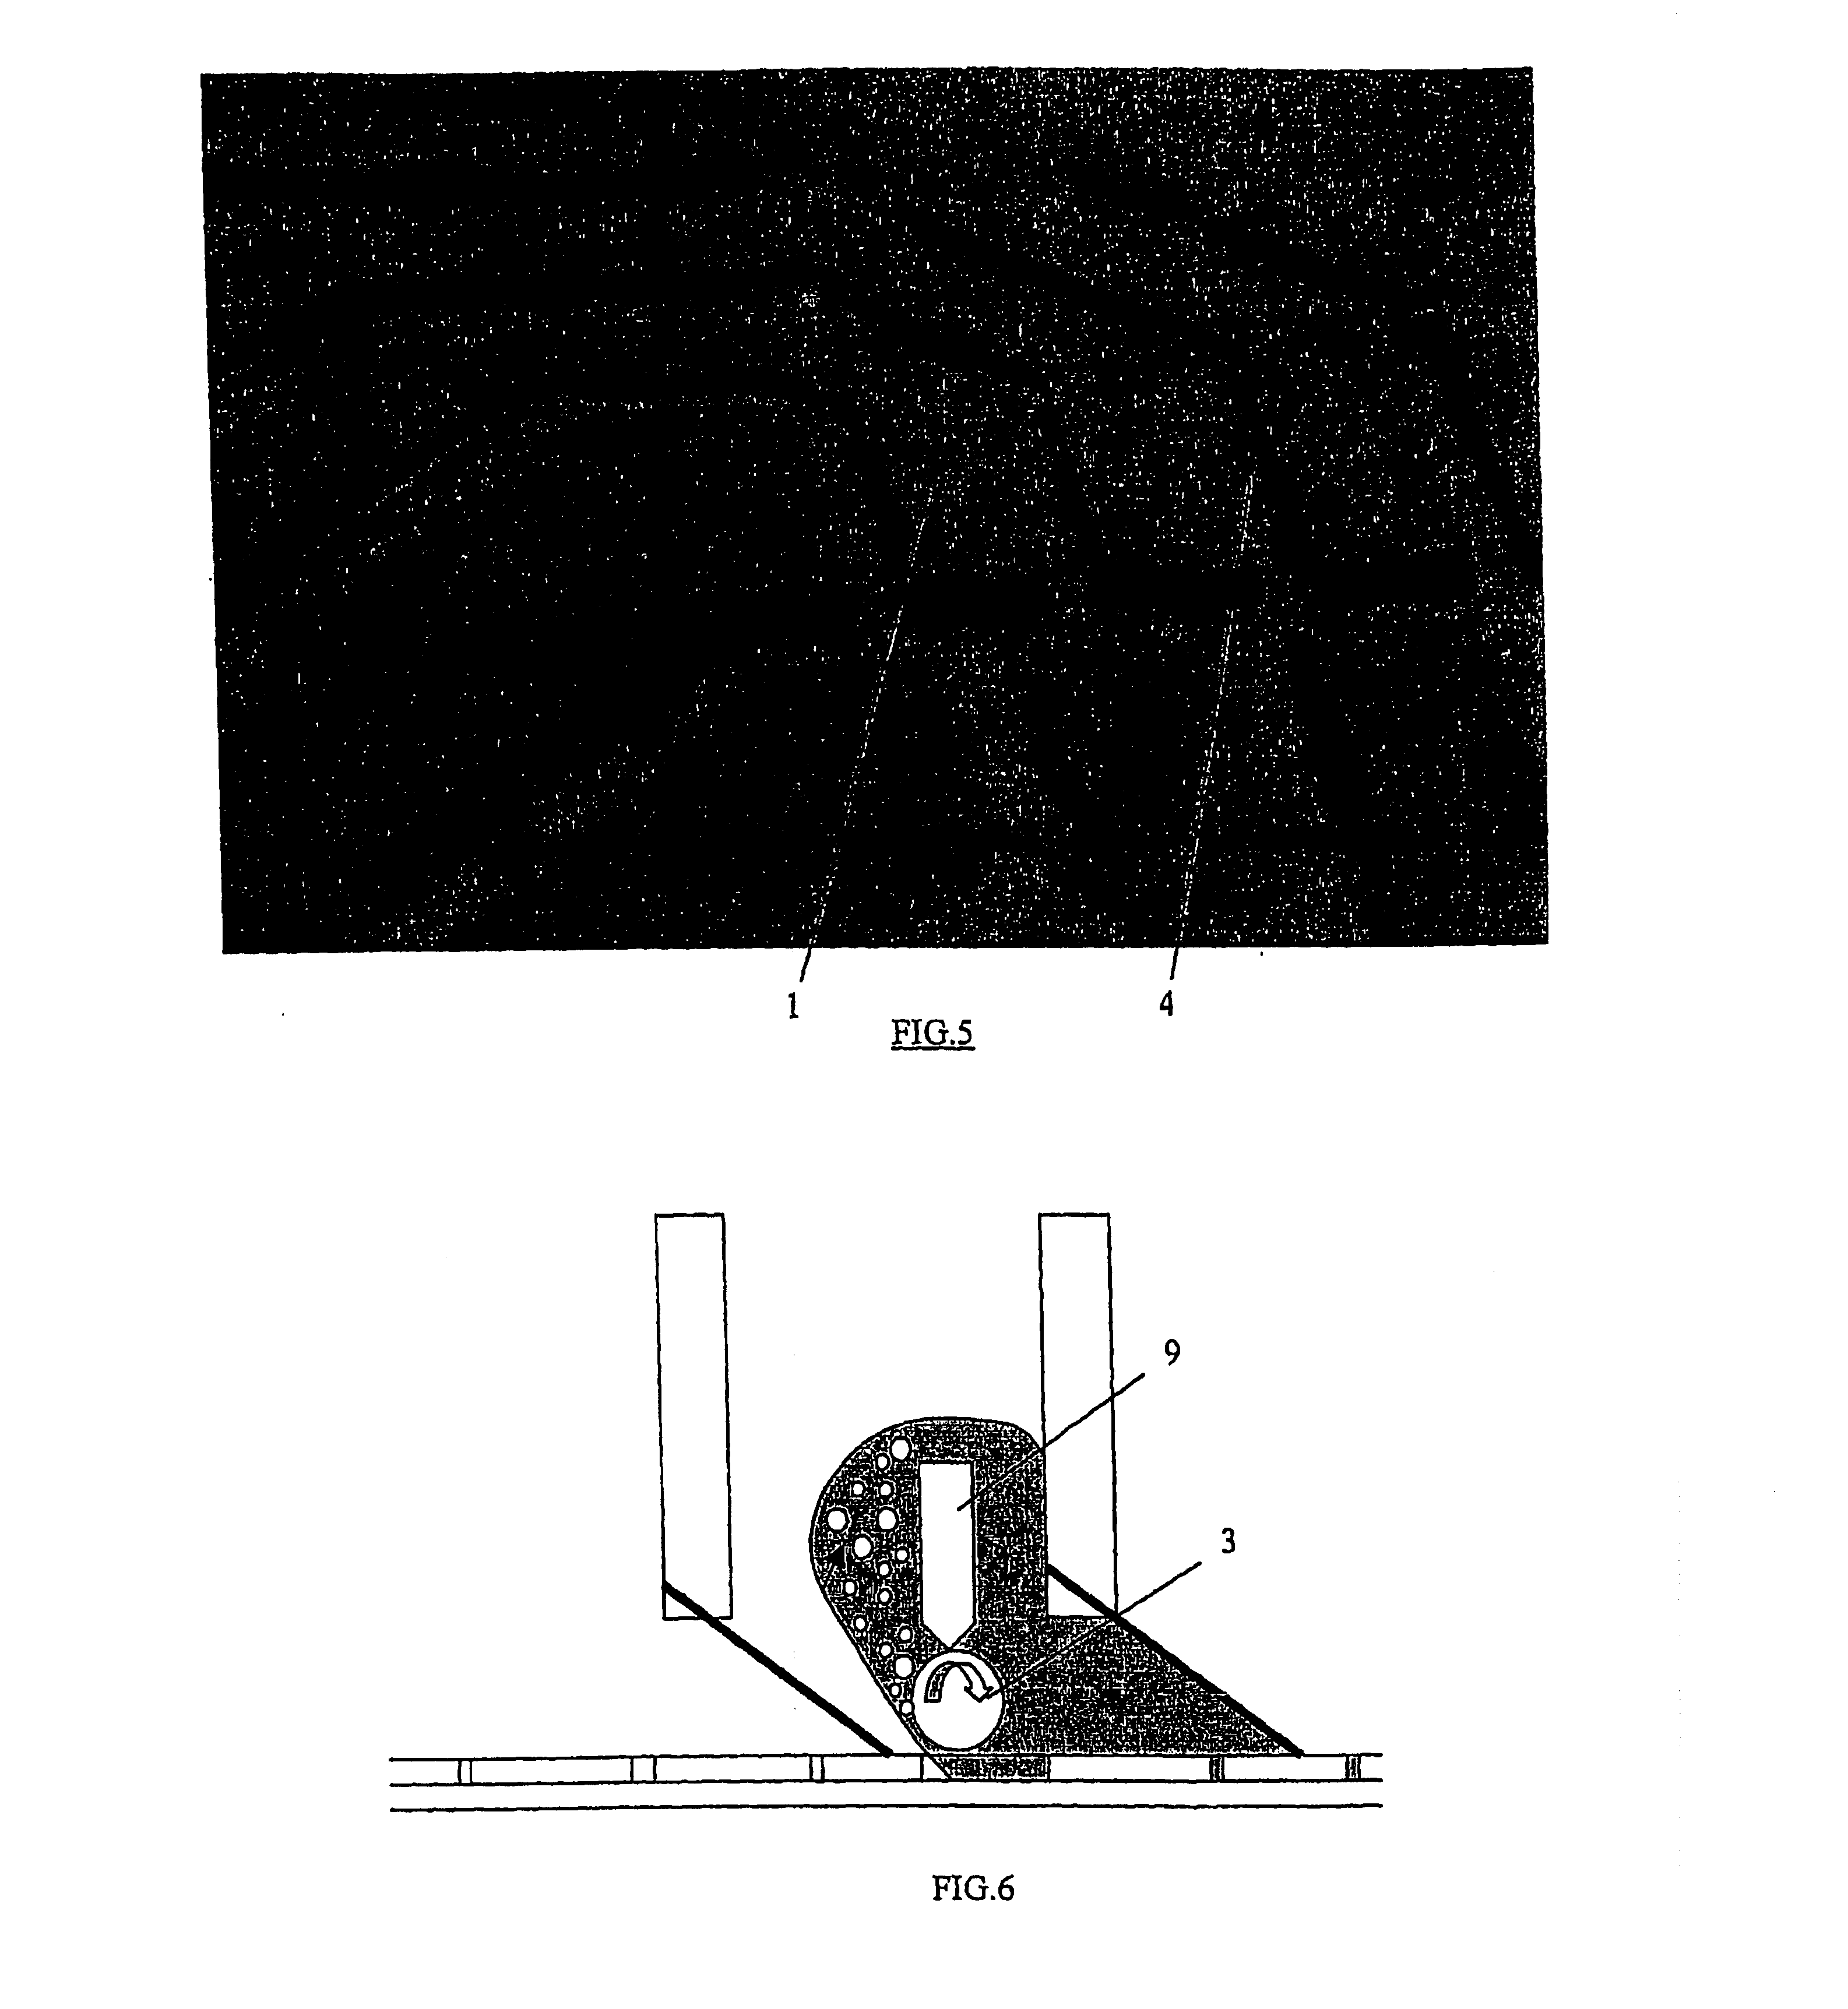 Method and device for filling zones situated in hollows or between tracks with a viscous product on a printed circuit board and apparatus using such a device